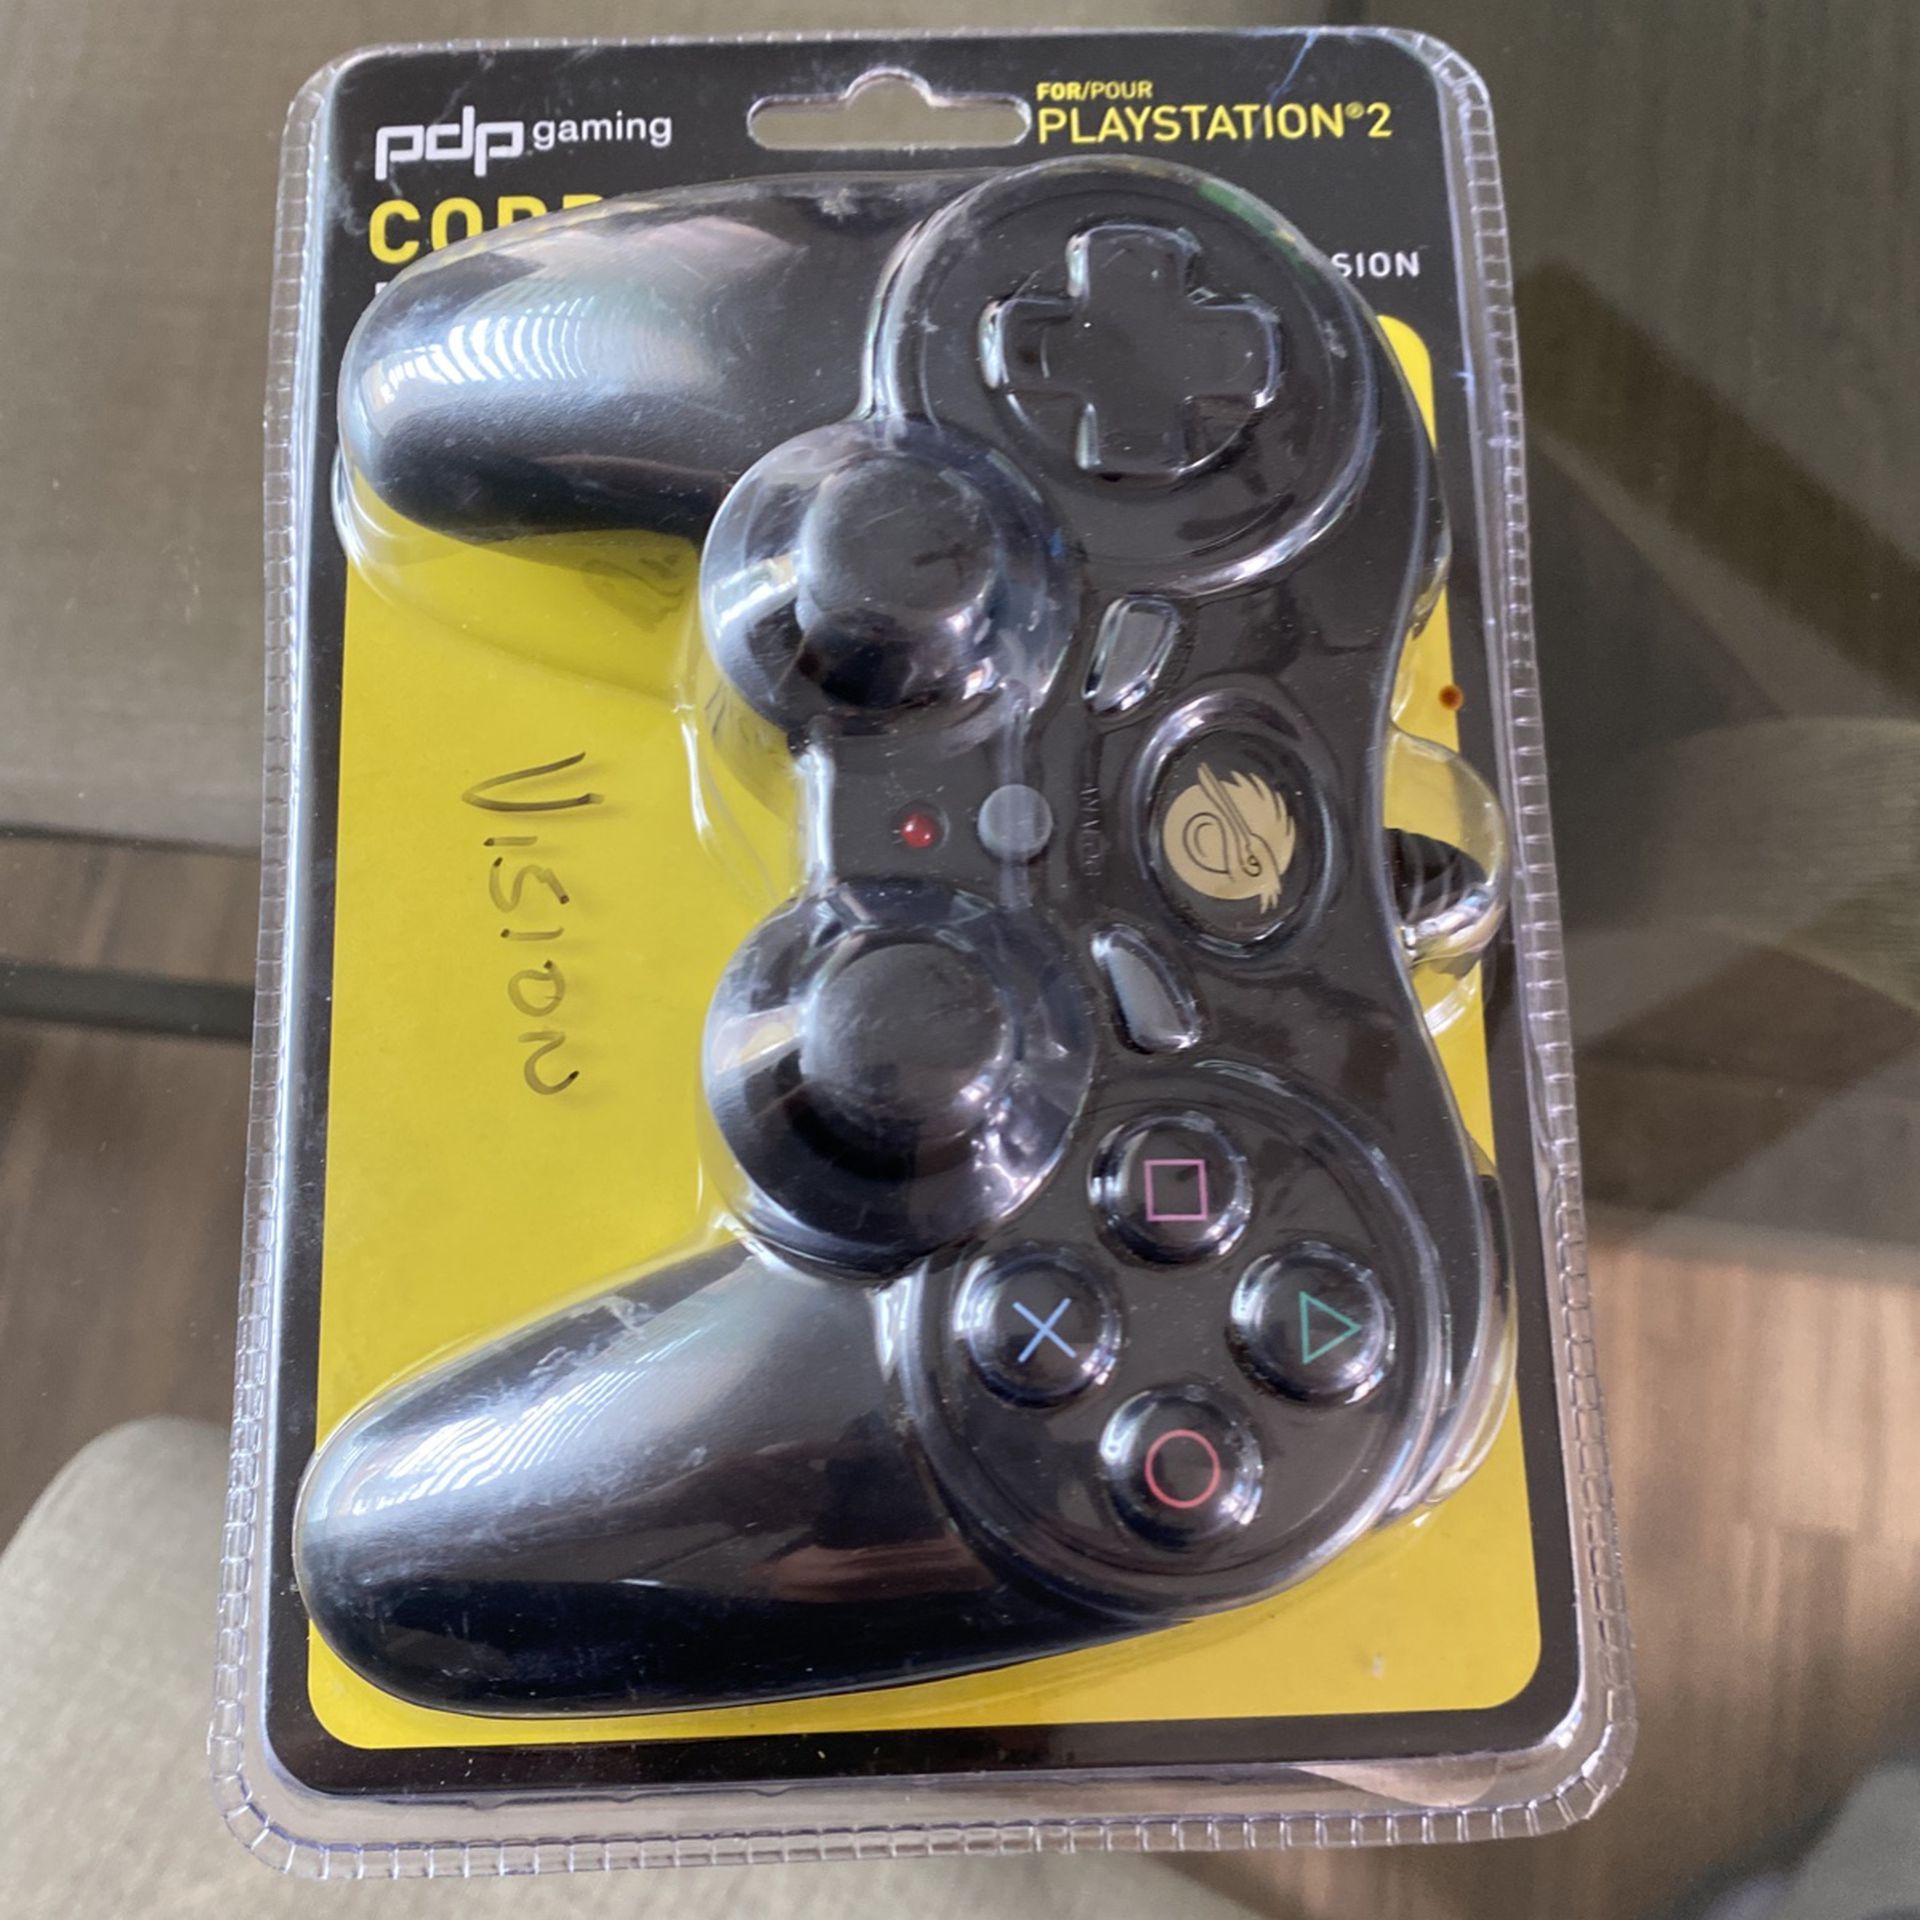 PDP Gaming PlayStation 2 for Sale in Bakersfield, OfferUp